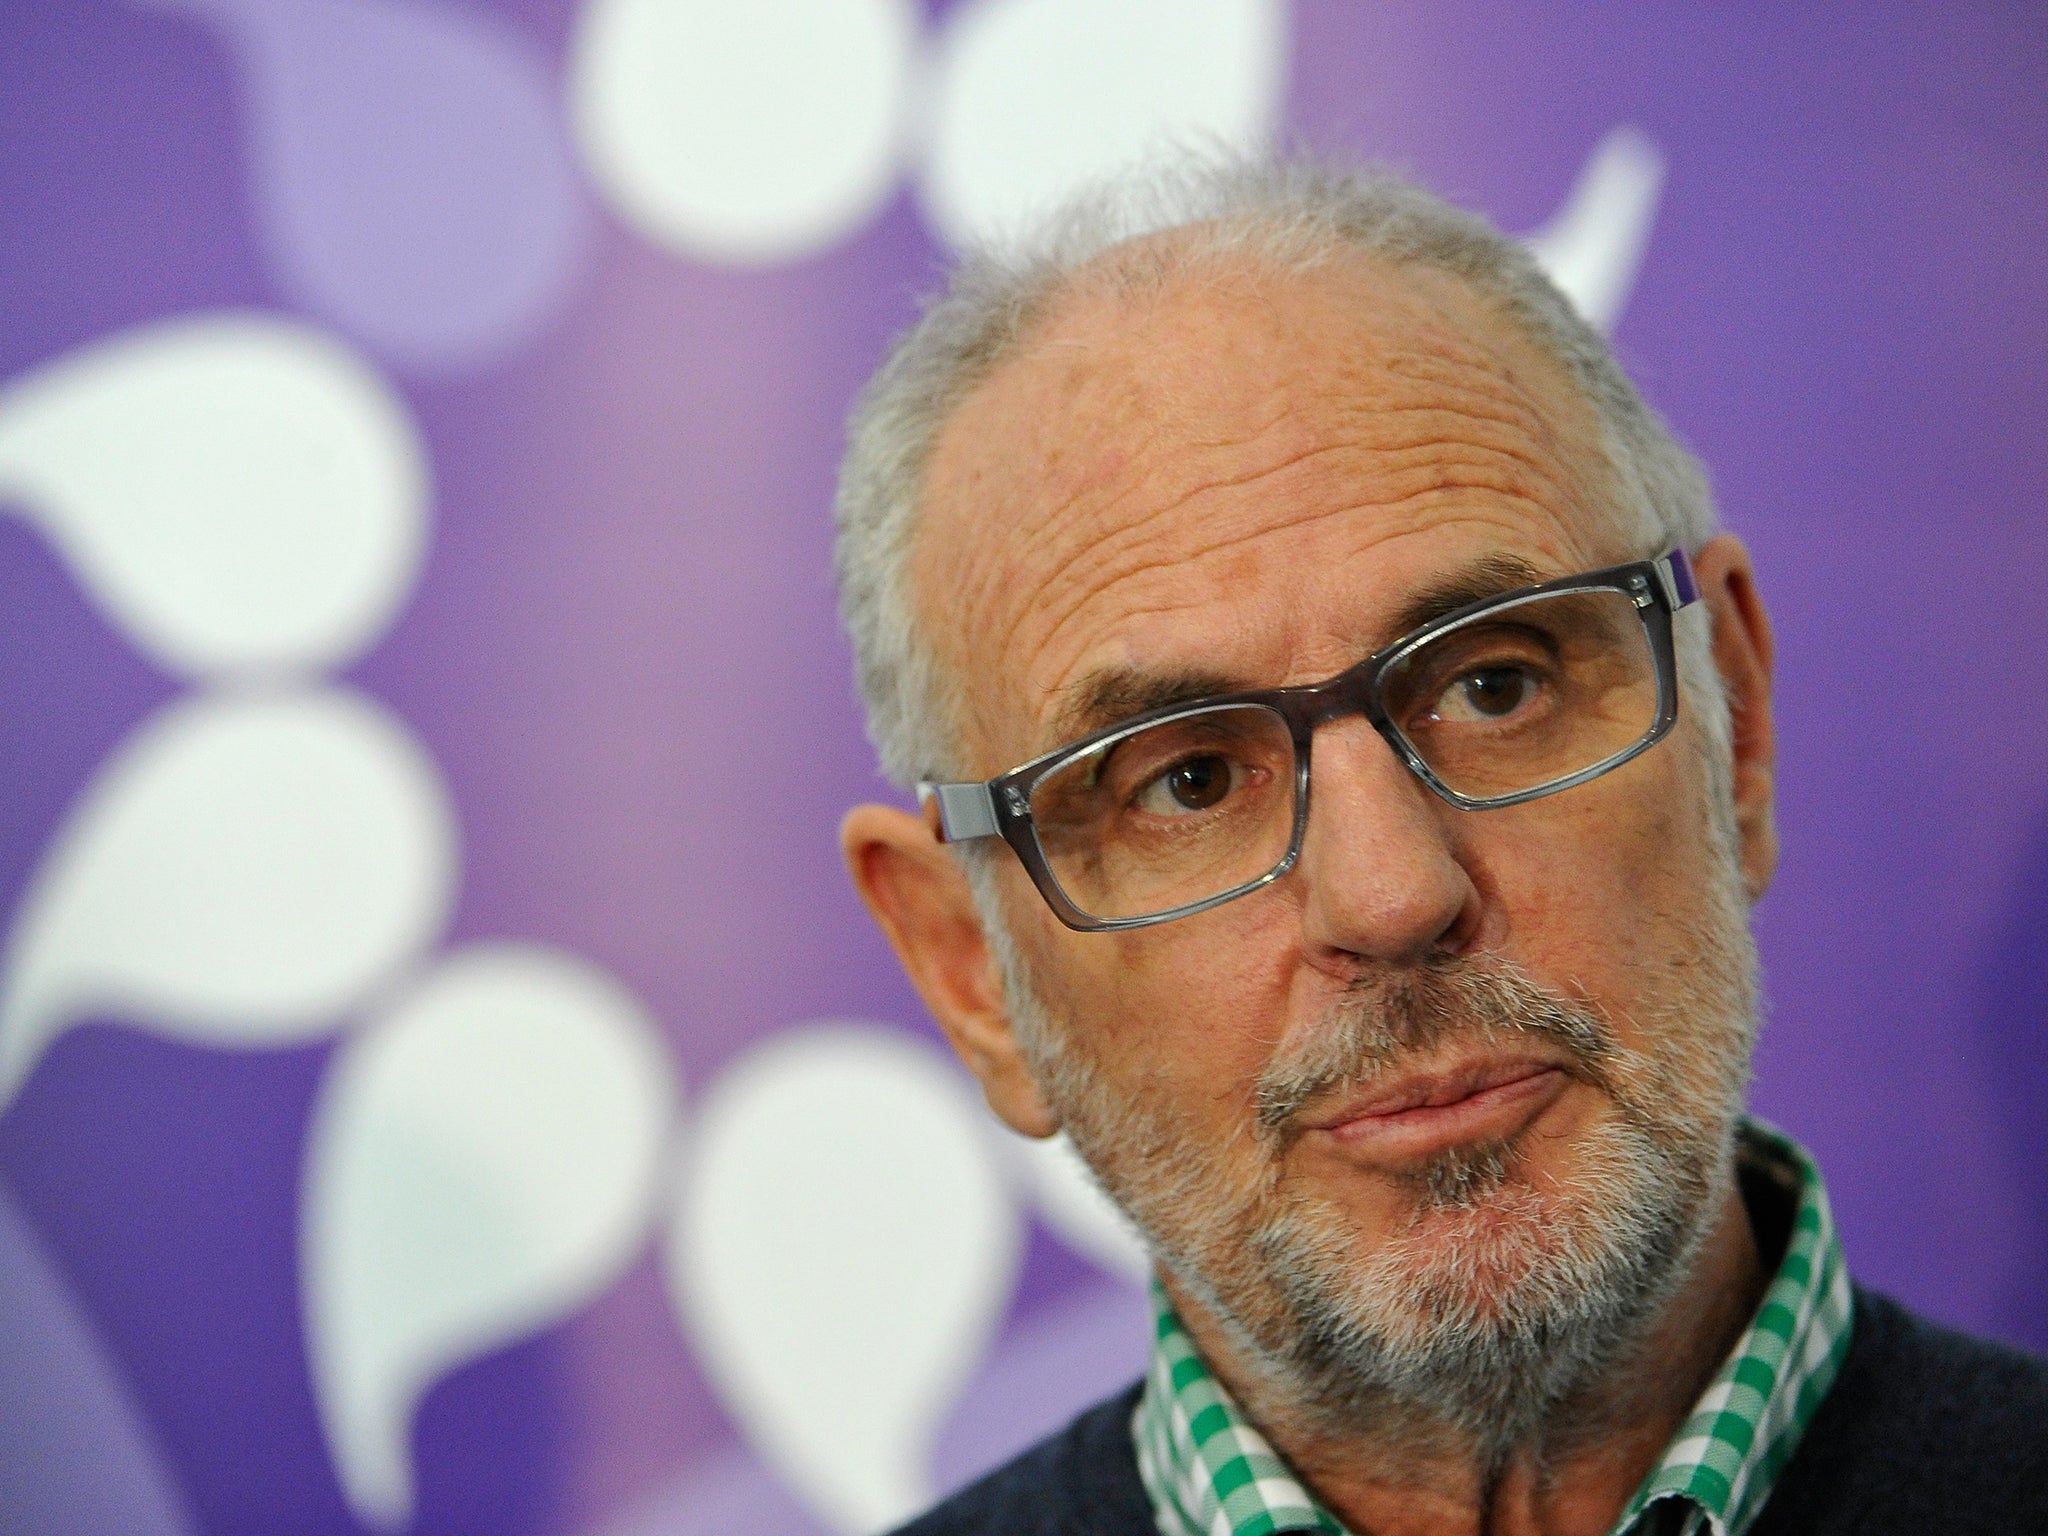 The Australian Medical Board considers Philip Nitschke to be a ‘serious risk’ to the public